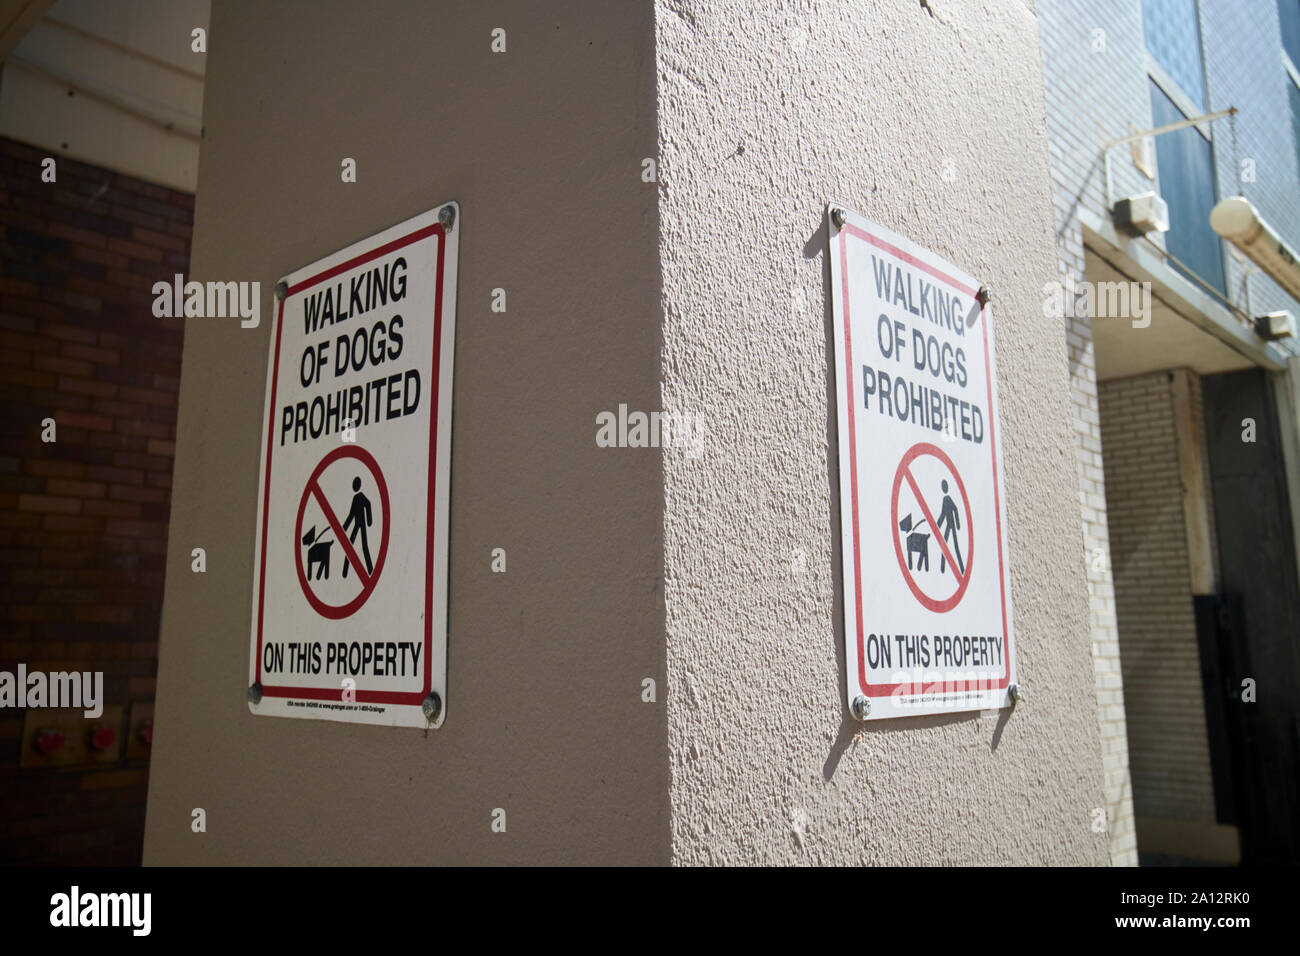 warning signs banning walking of dogs prohibited on this property in a building chicago illinois united states of america Stock Photo